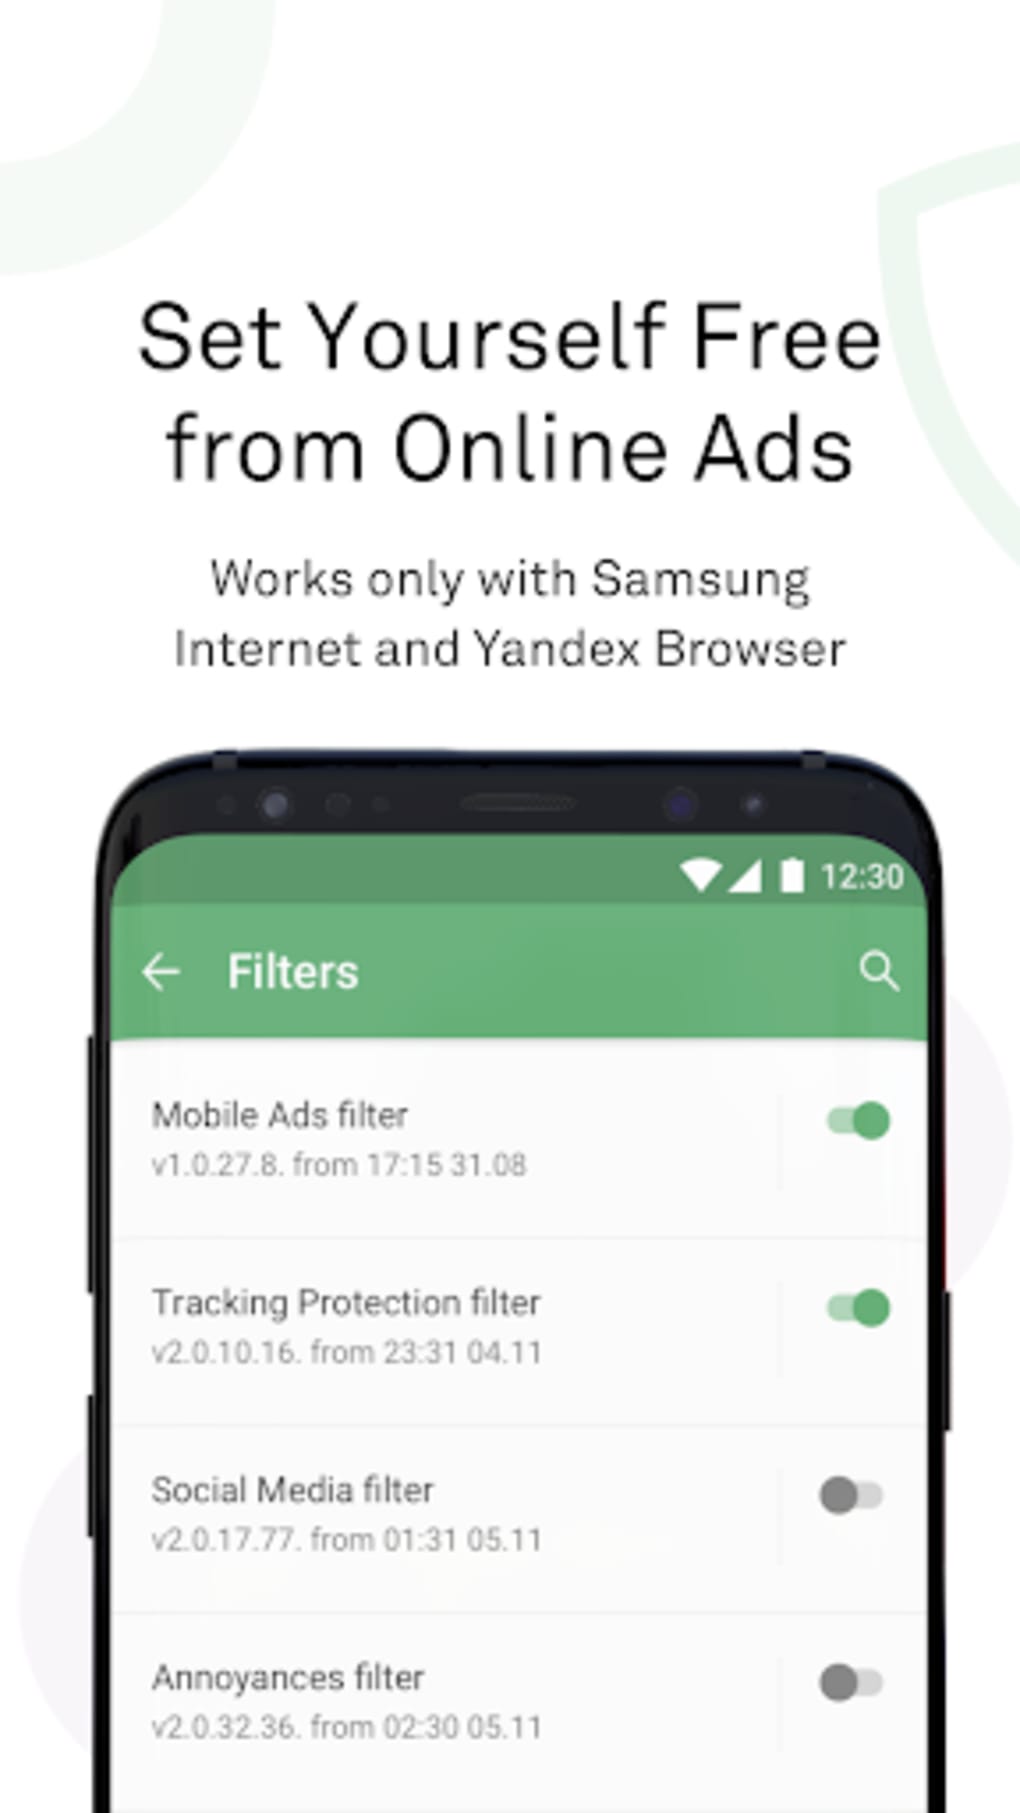 adguard android full free